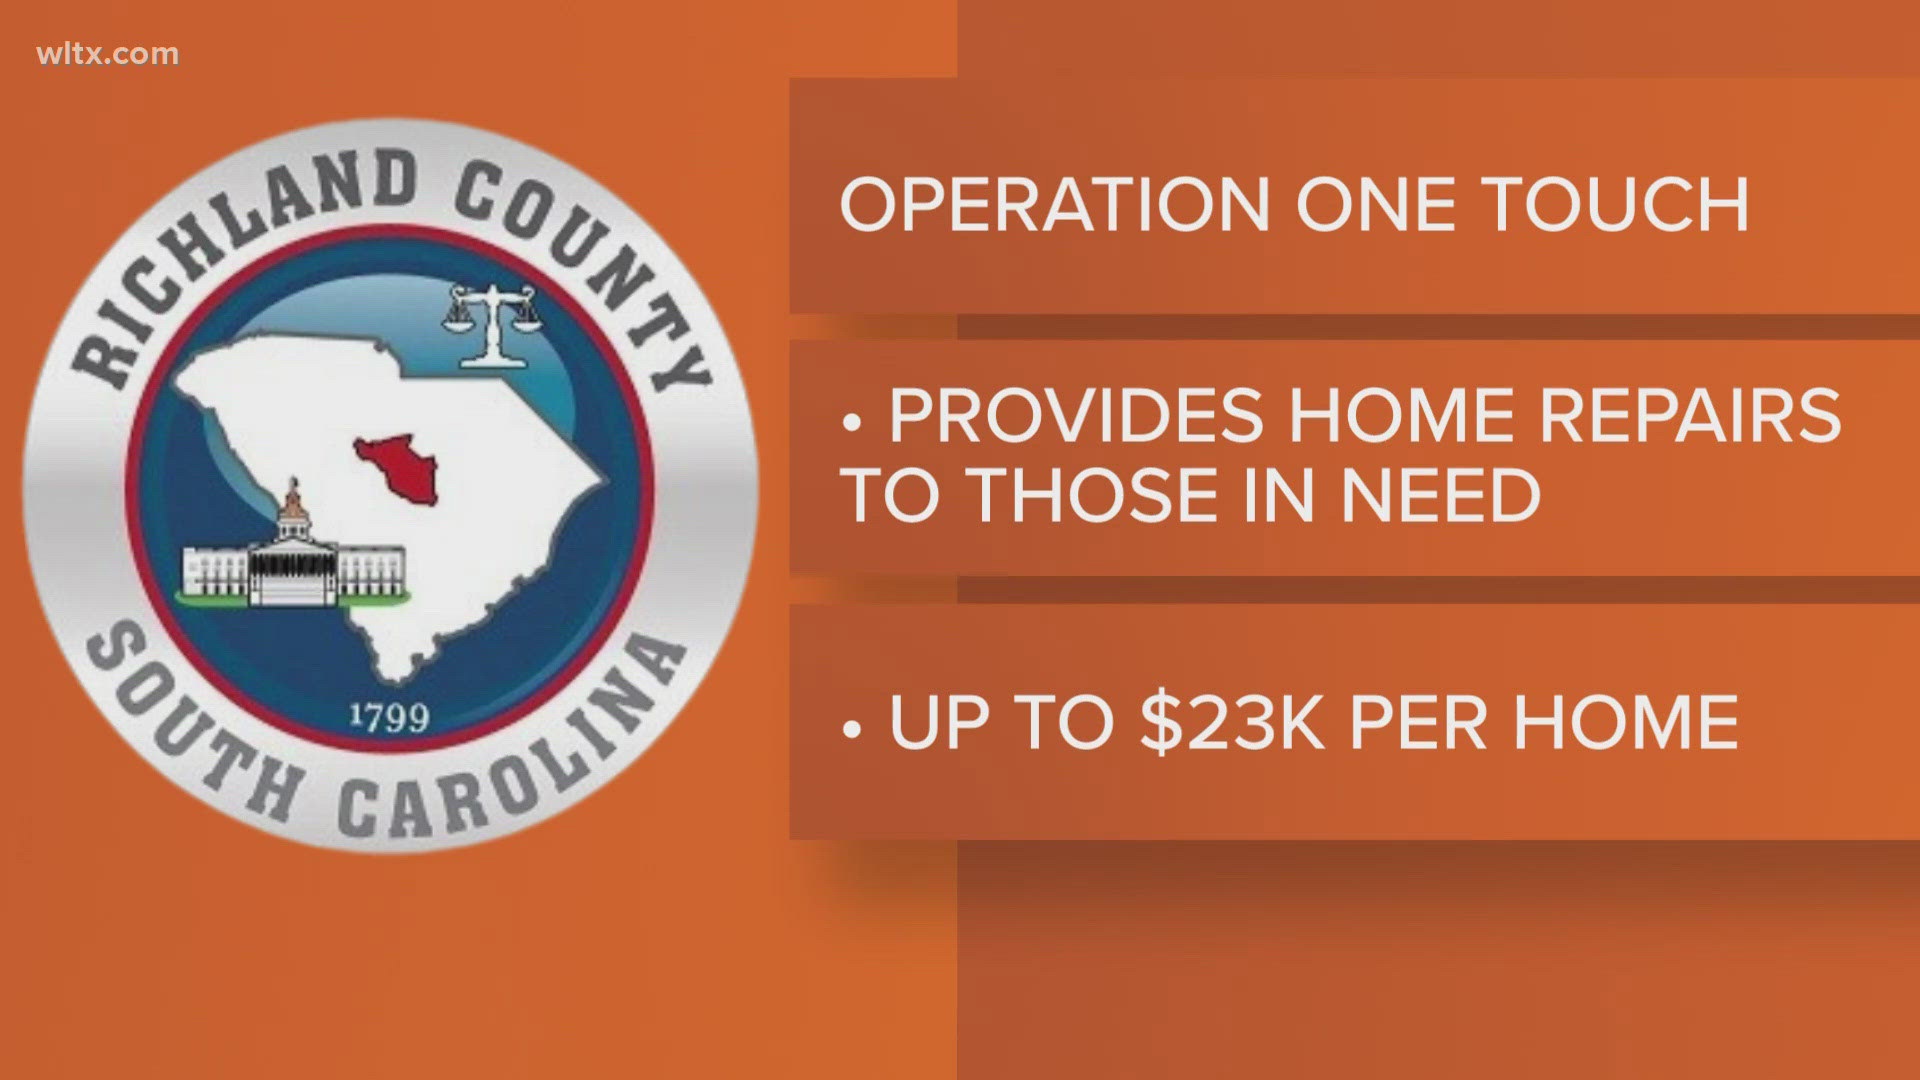 Low- to moderate-income households in Richland County can now get help with critical housing upgrades through Operation One Touch.